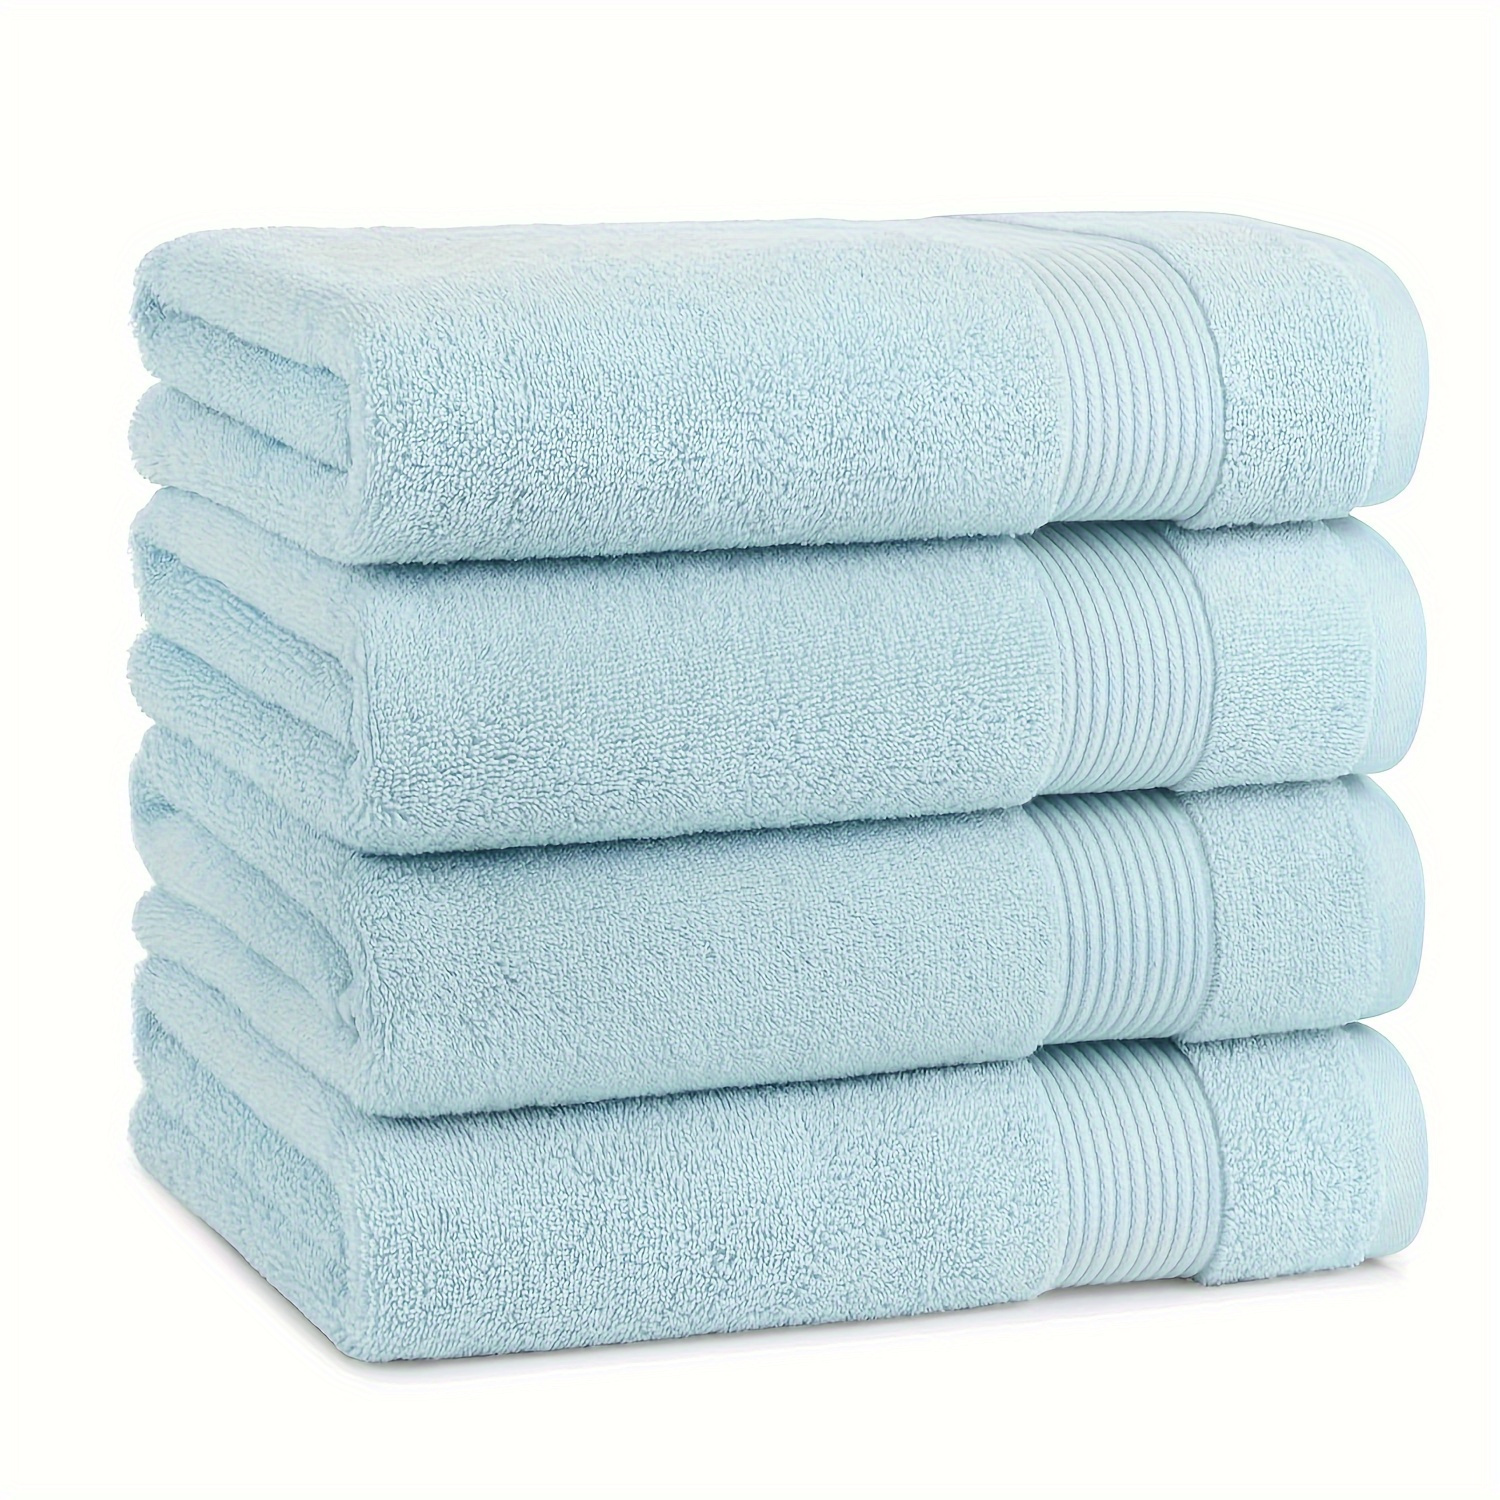 

4pcs Super Soft Washcloths Towels, Premium Quality Towels For Bathroom, Quick Dry And Absorbent Cotton Towel, Perfect For Daily Use, 13 X 13 Inch